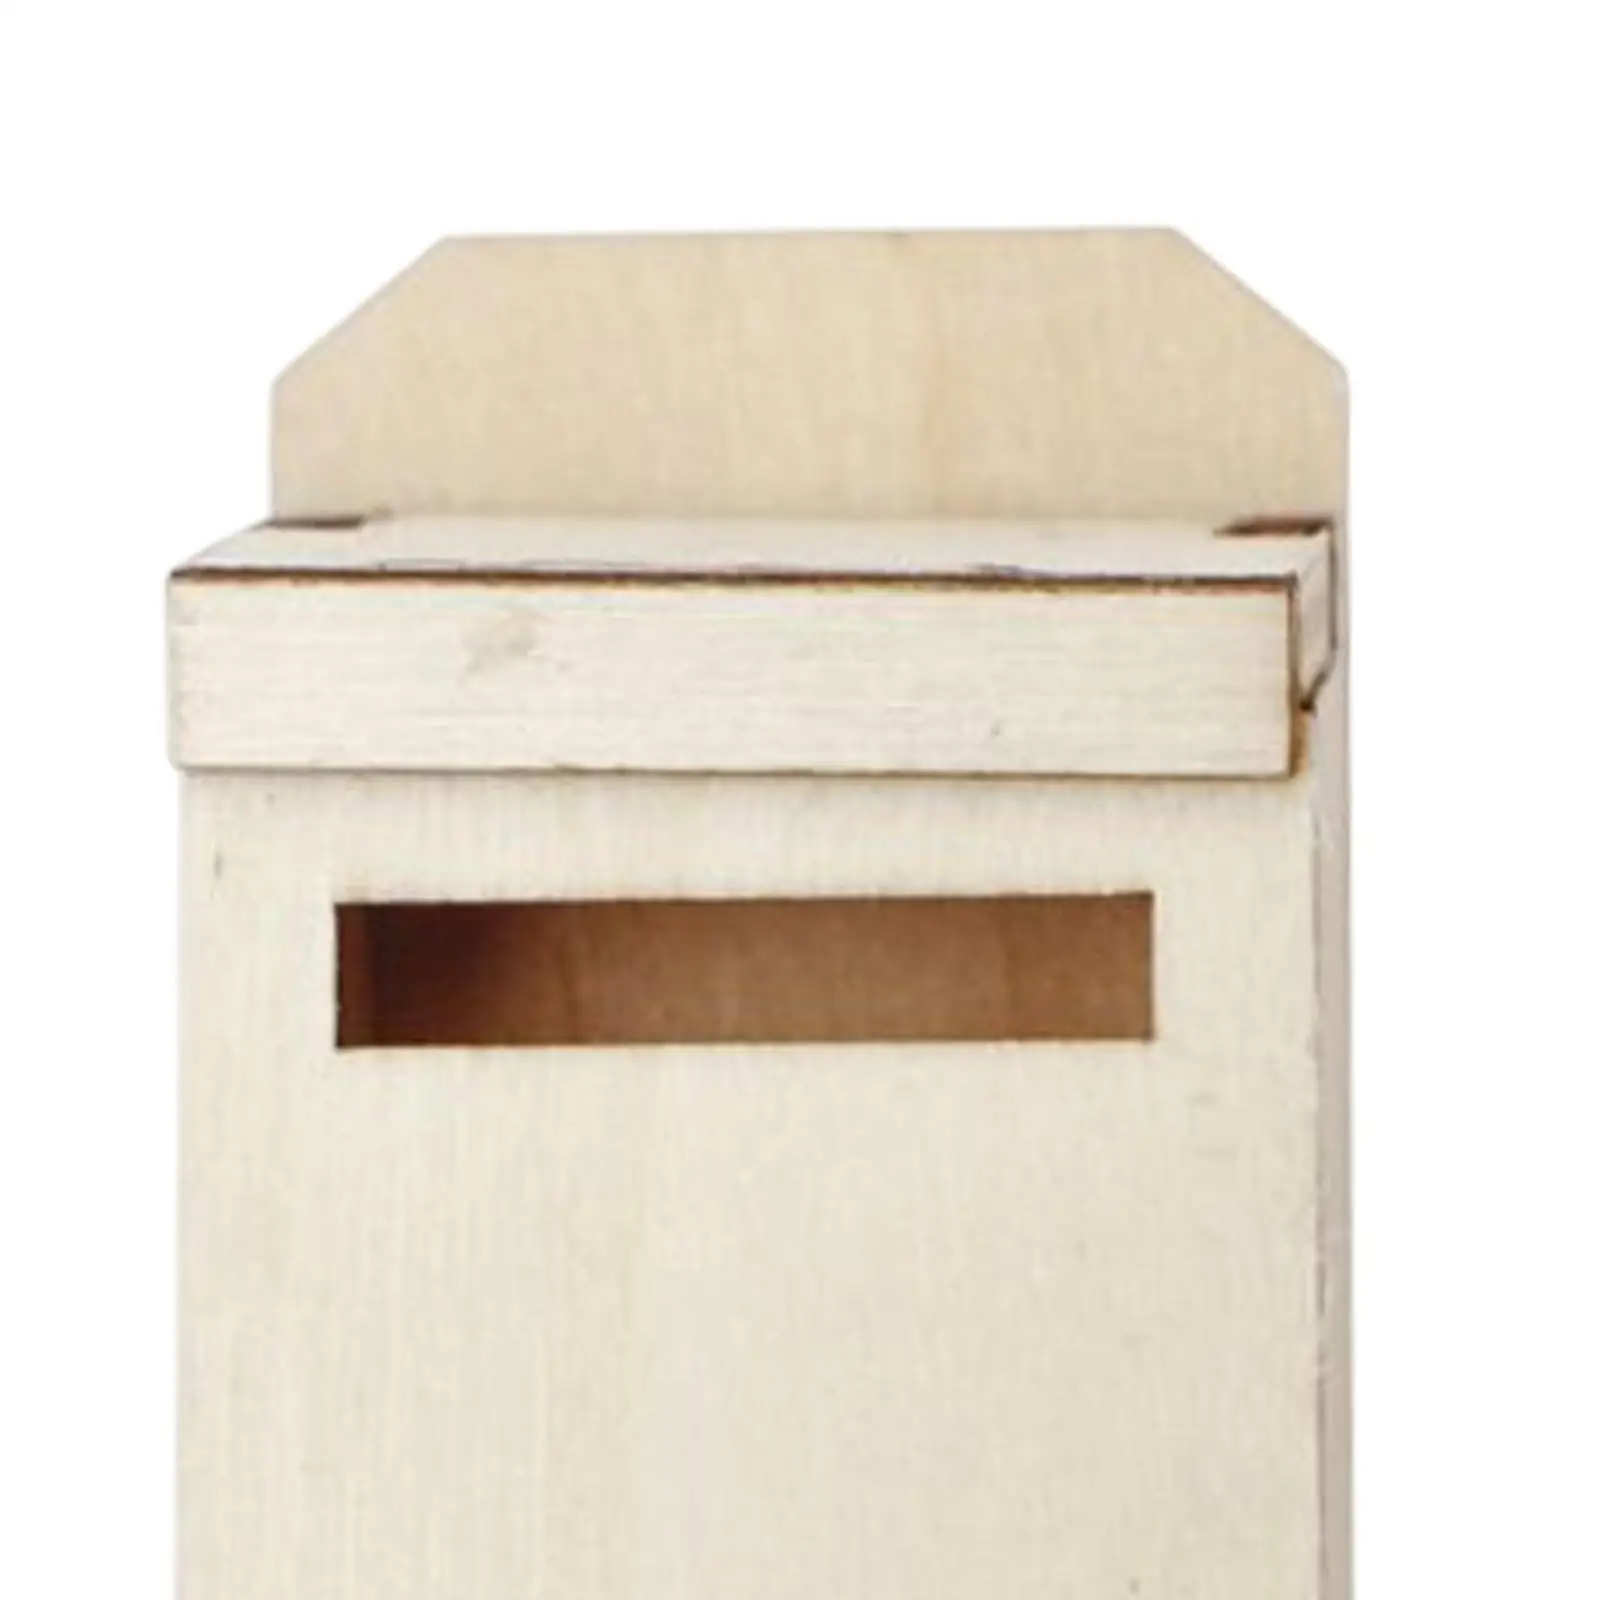 Mini Mailbox Dollhouse Decoration Accessories postbox Box 1:12 Wooden Mailbox images - 6